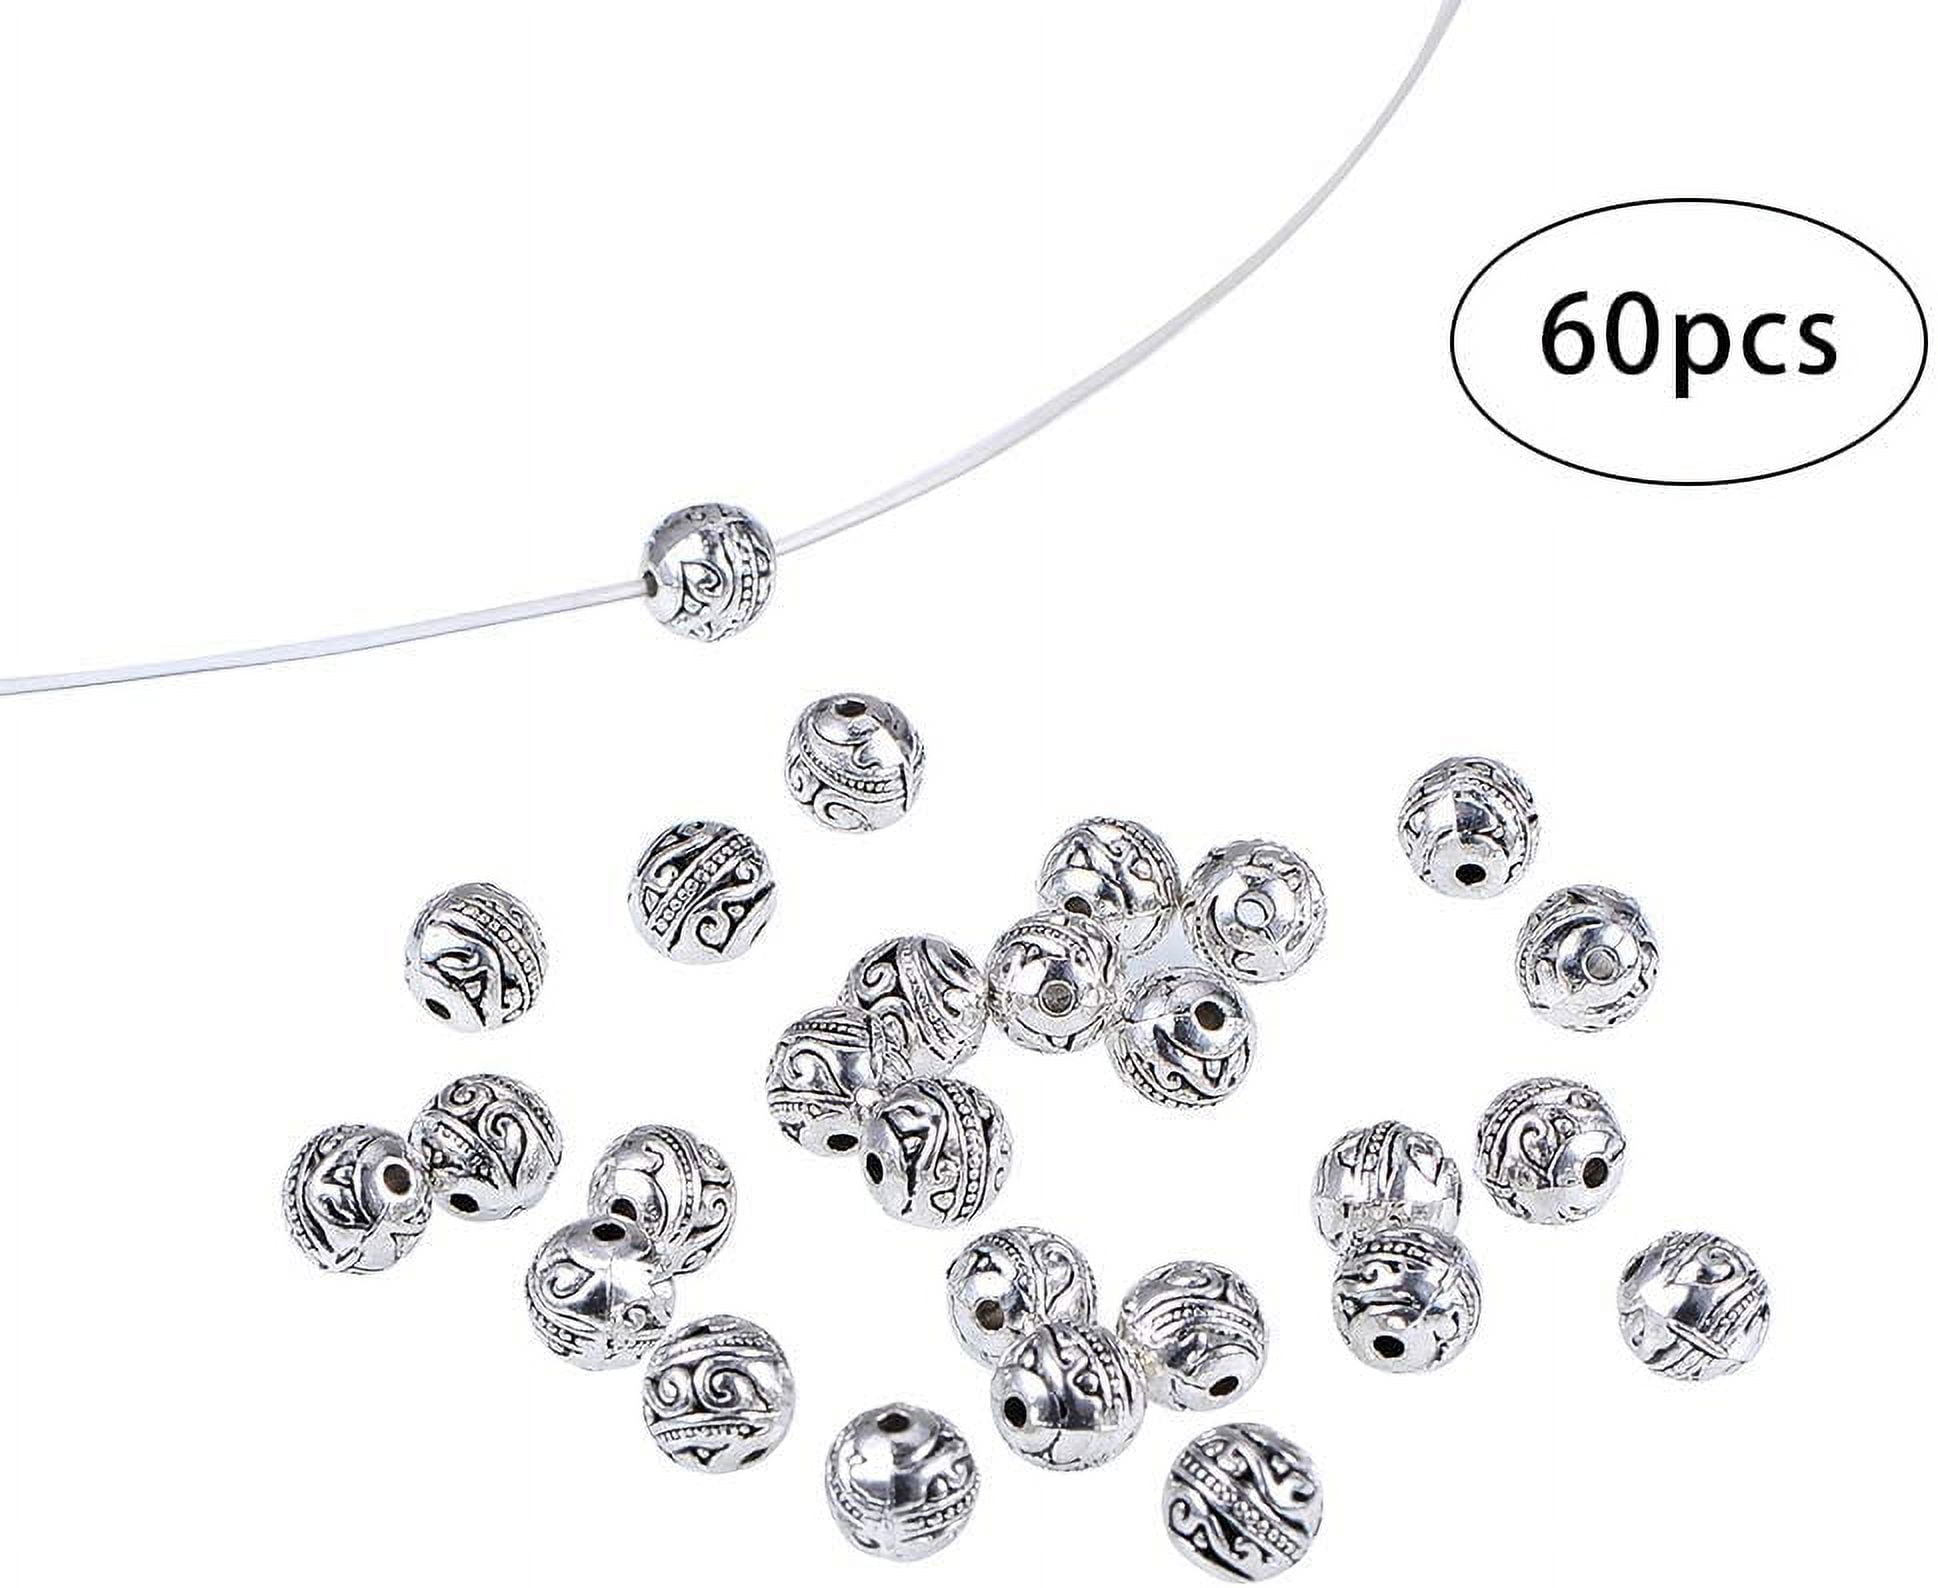 100pcs/lot 7mm Tibetan silver spacer beads dis spacers for jewelry making  metal material jewelry supplieslies wholesale